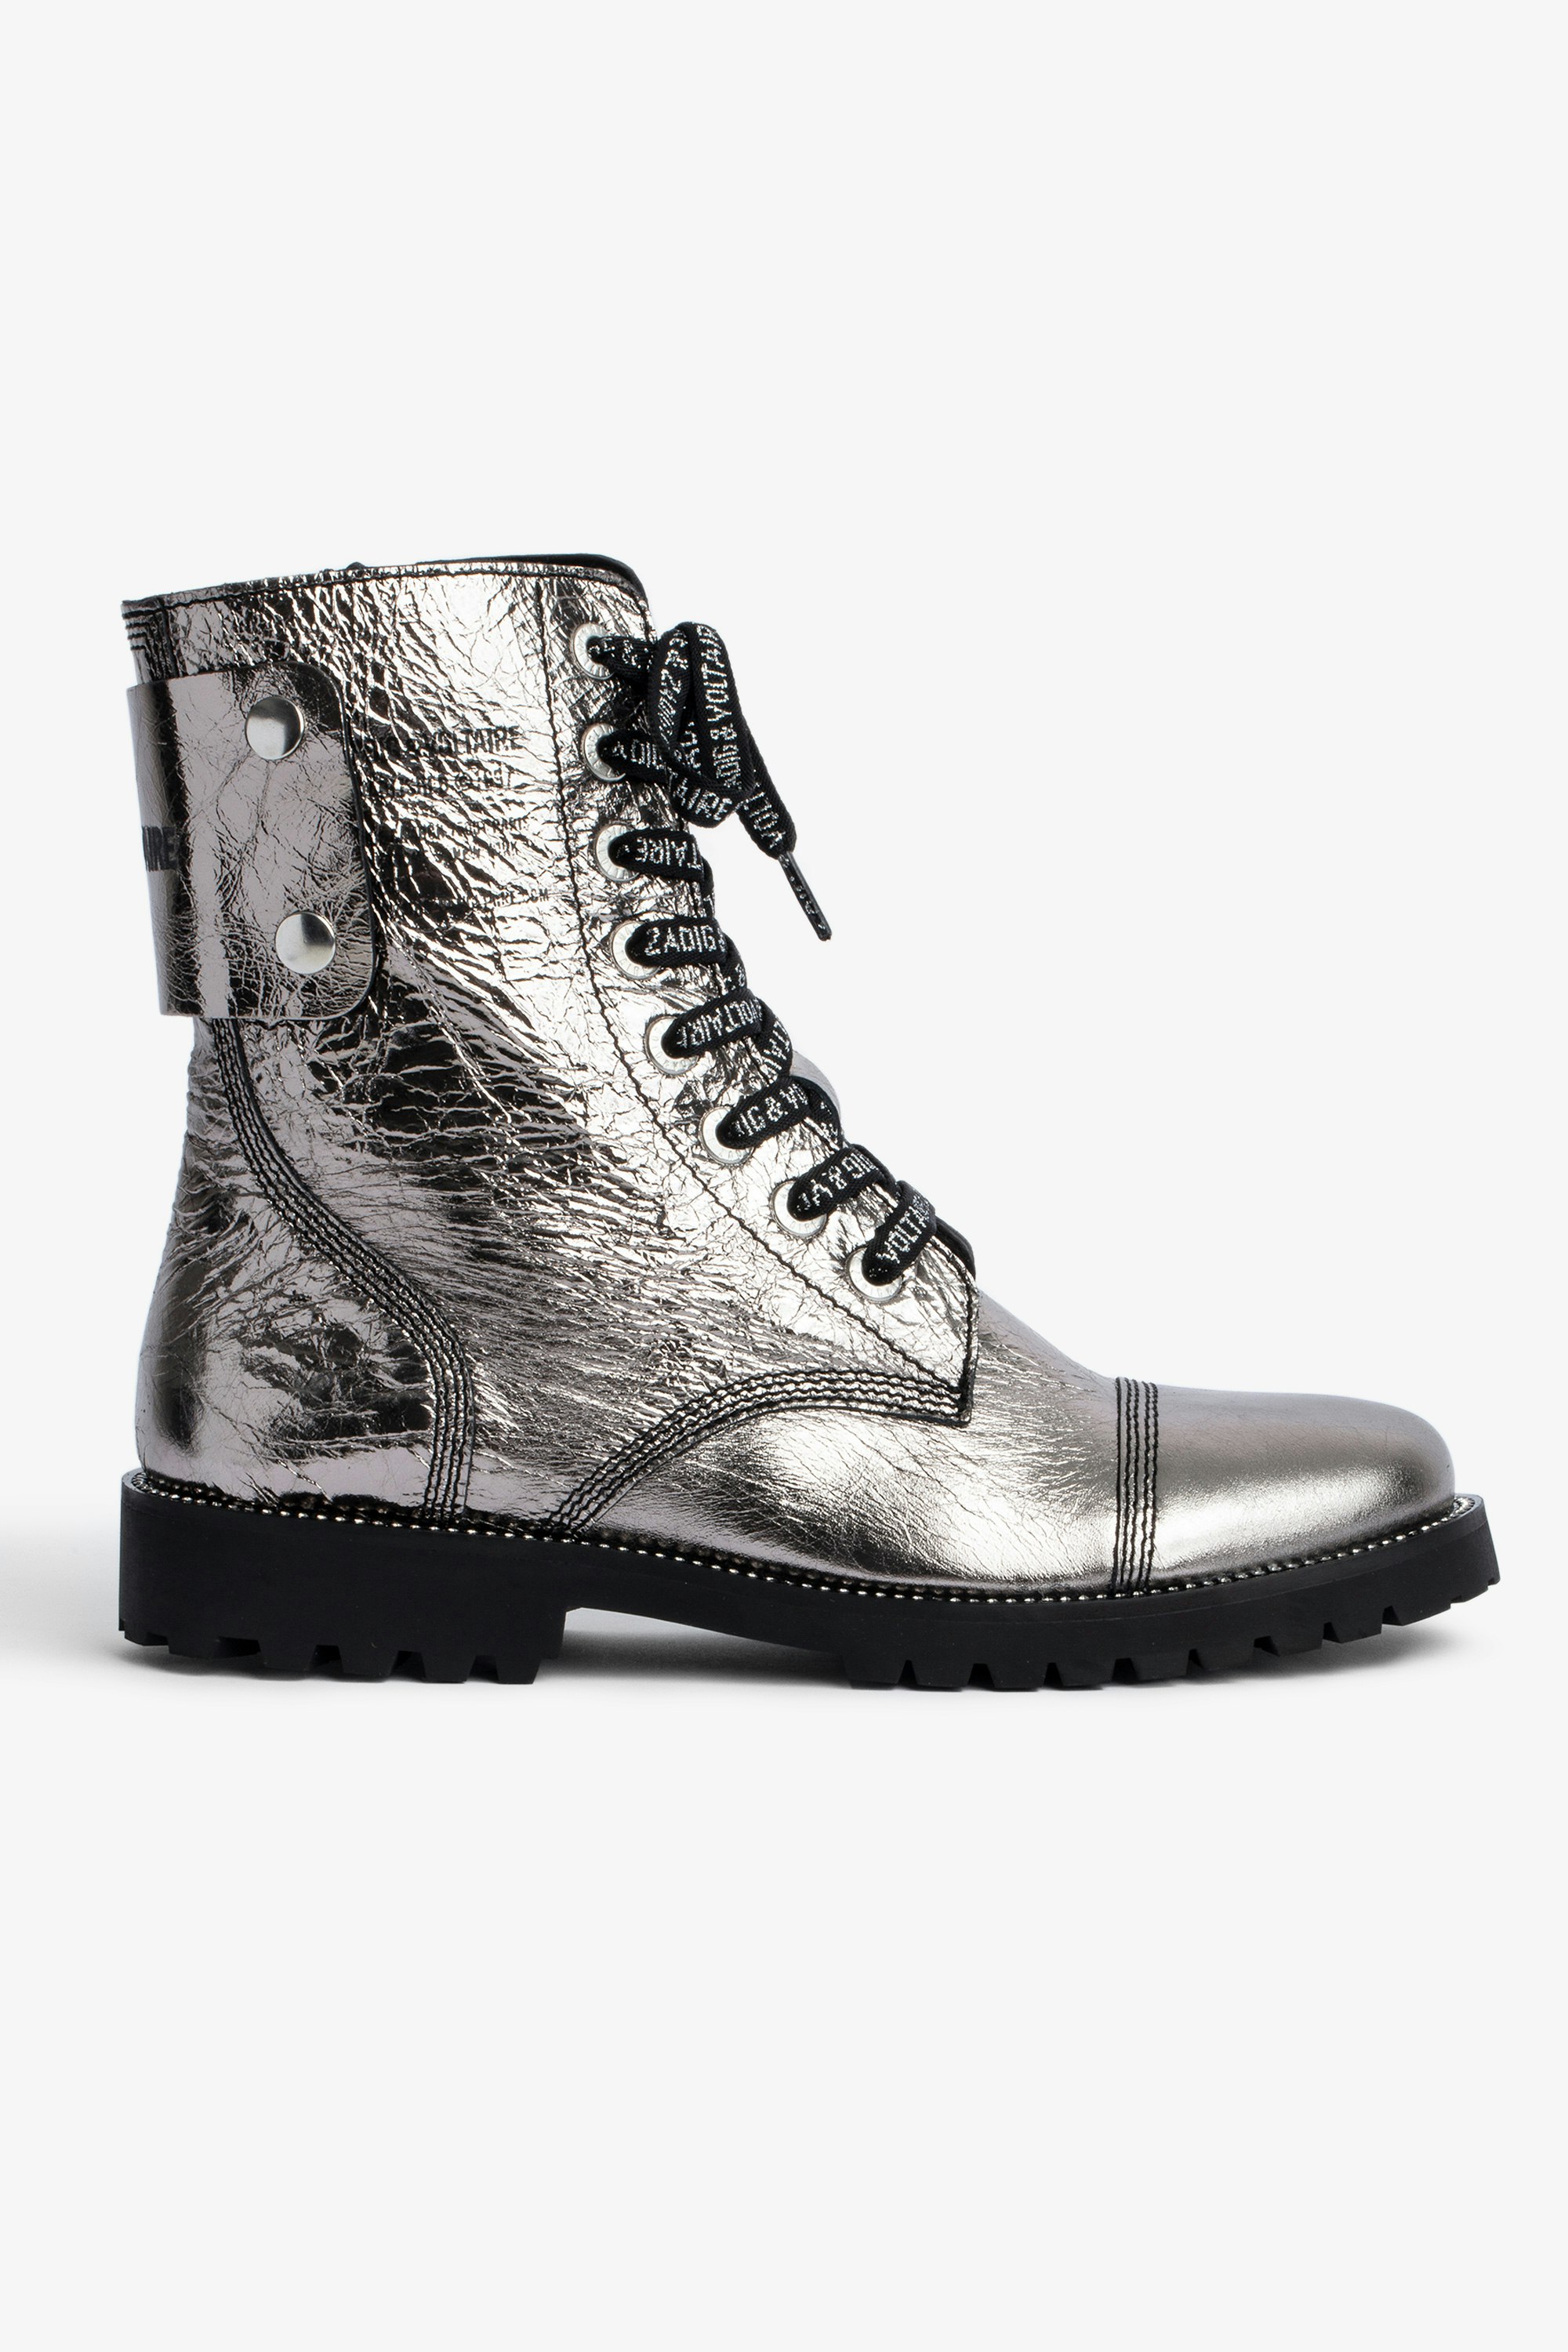 Joe Vintage Metal Ankle ブーツ Women's mid-calf boots in silver vintage leather